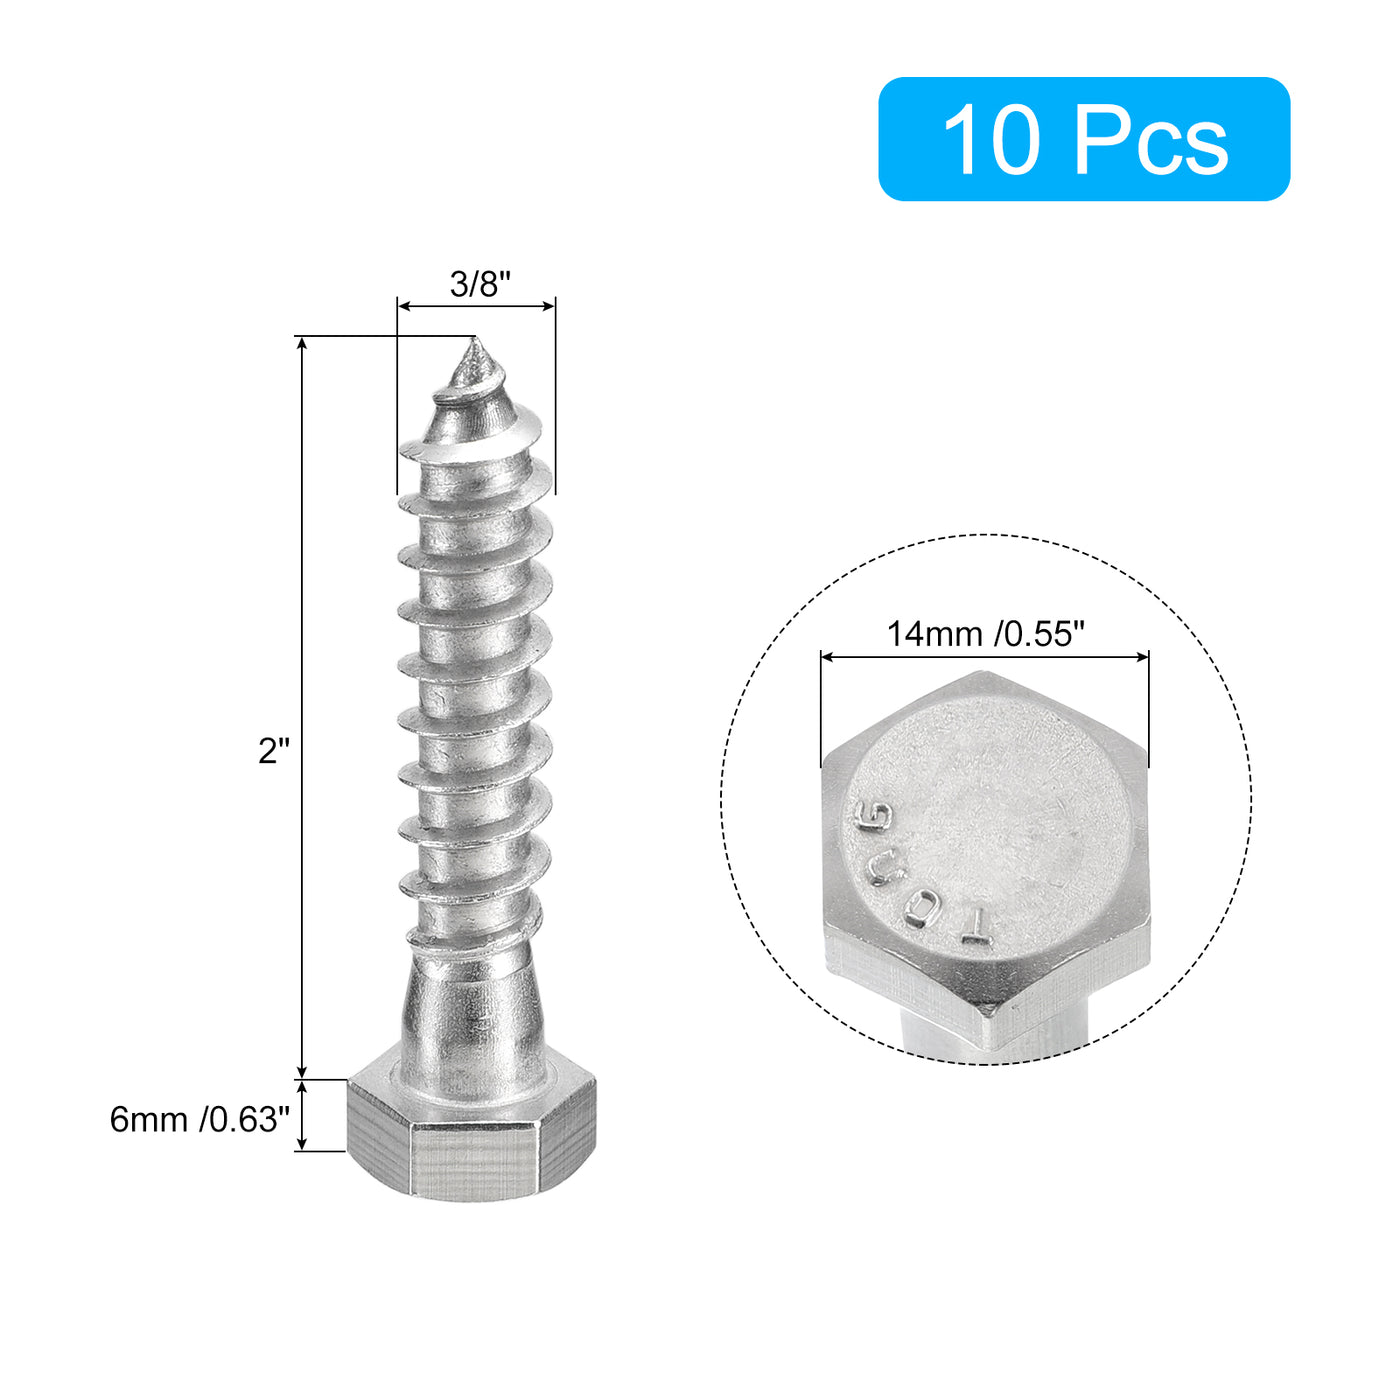 uxcell Uxcell Hex Head Lag Screws Bolts, 10pcs 3/8" x 2" 304 Stainless Steel Wood Screws